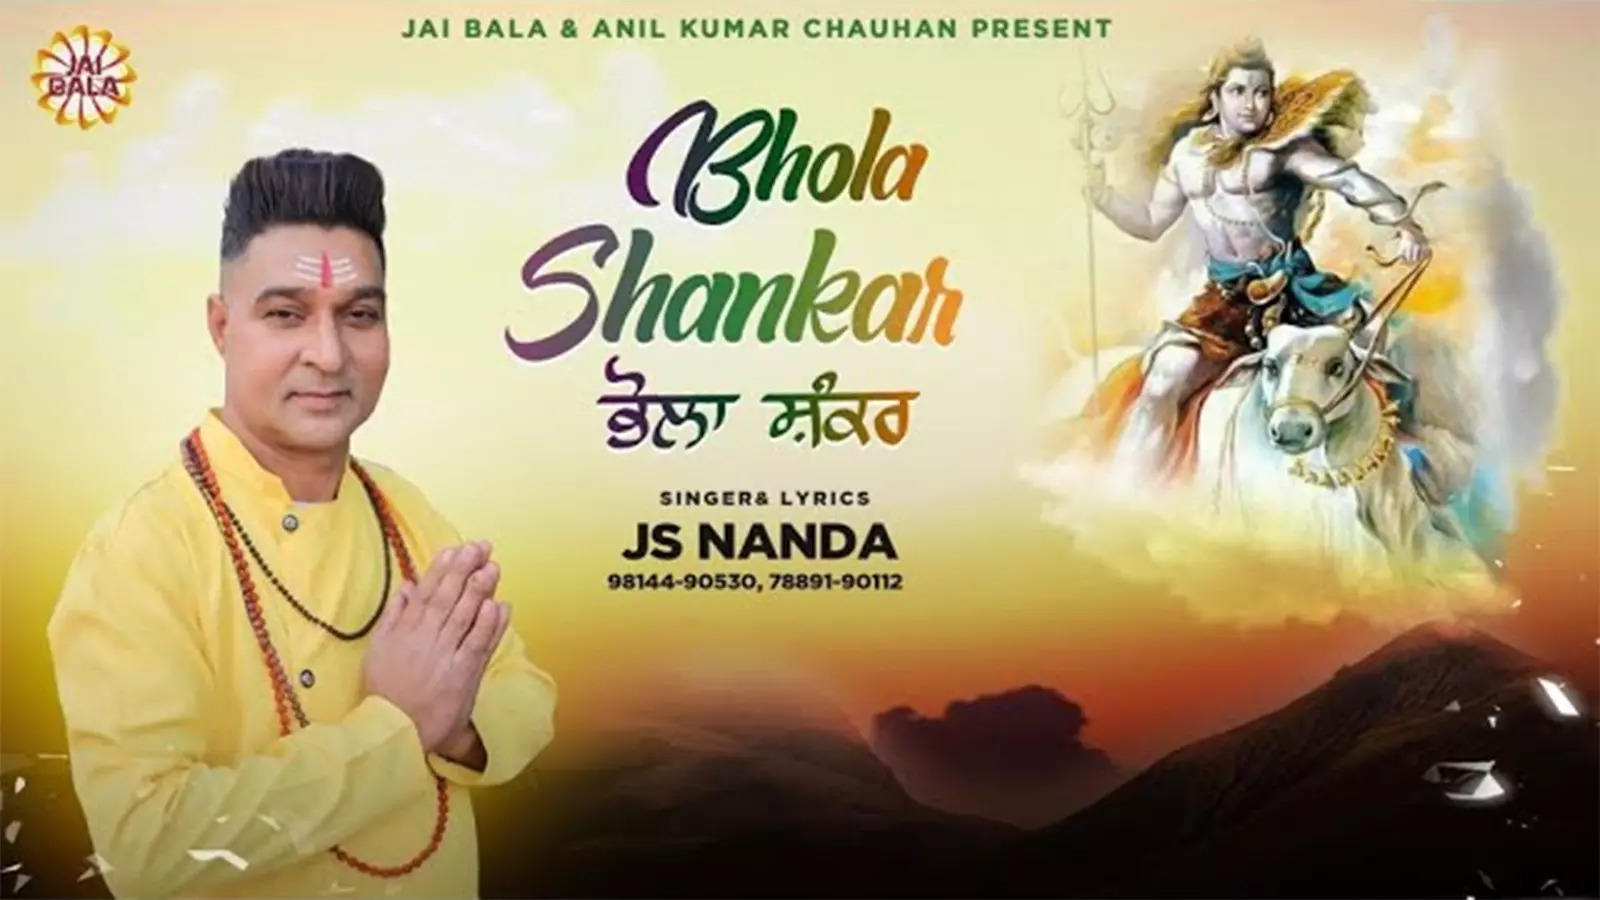 Check Out Latest Punjabi Devotional Song 'Bhola Shankar' Sung By JS Nanda |  Lifestyle - Times of India Videos